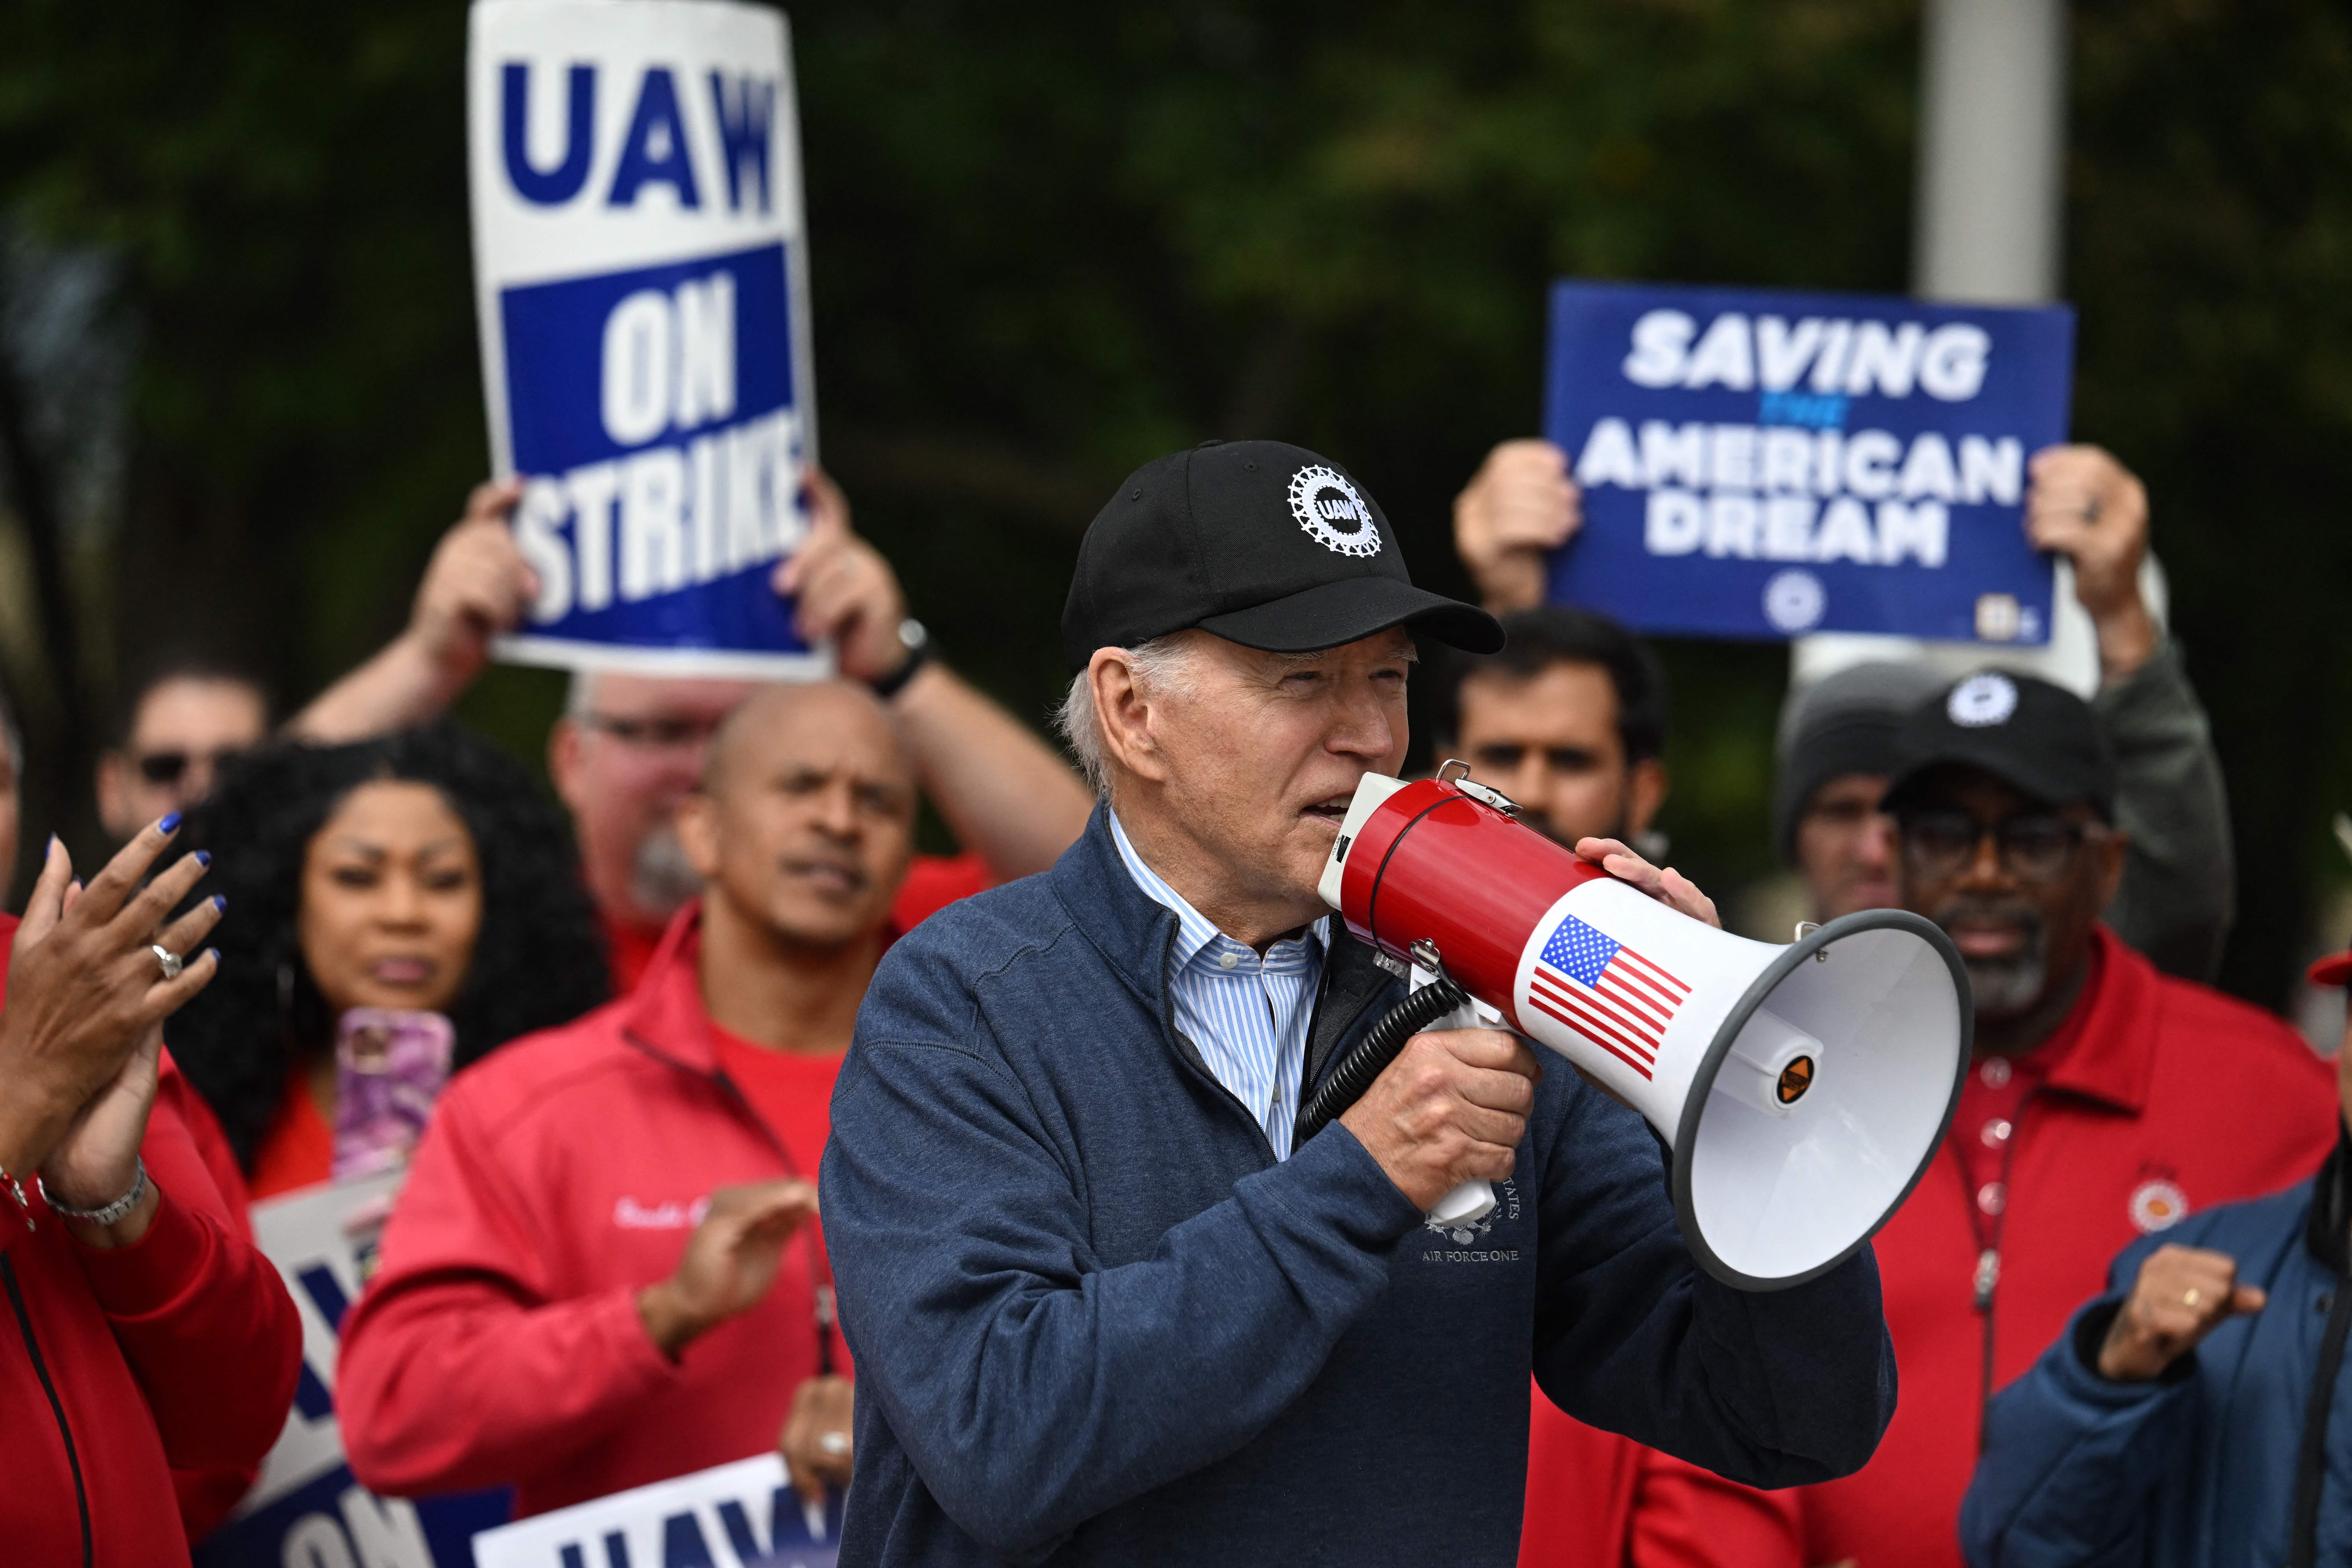 Biden speaking into a bullhorn while standing in front of striking auto workers holding signs saying "UAW on Strike" and "Saving the American Dream"